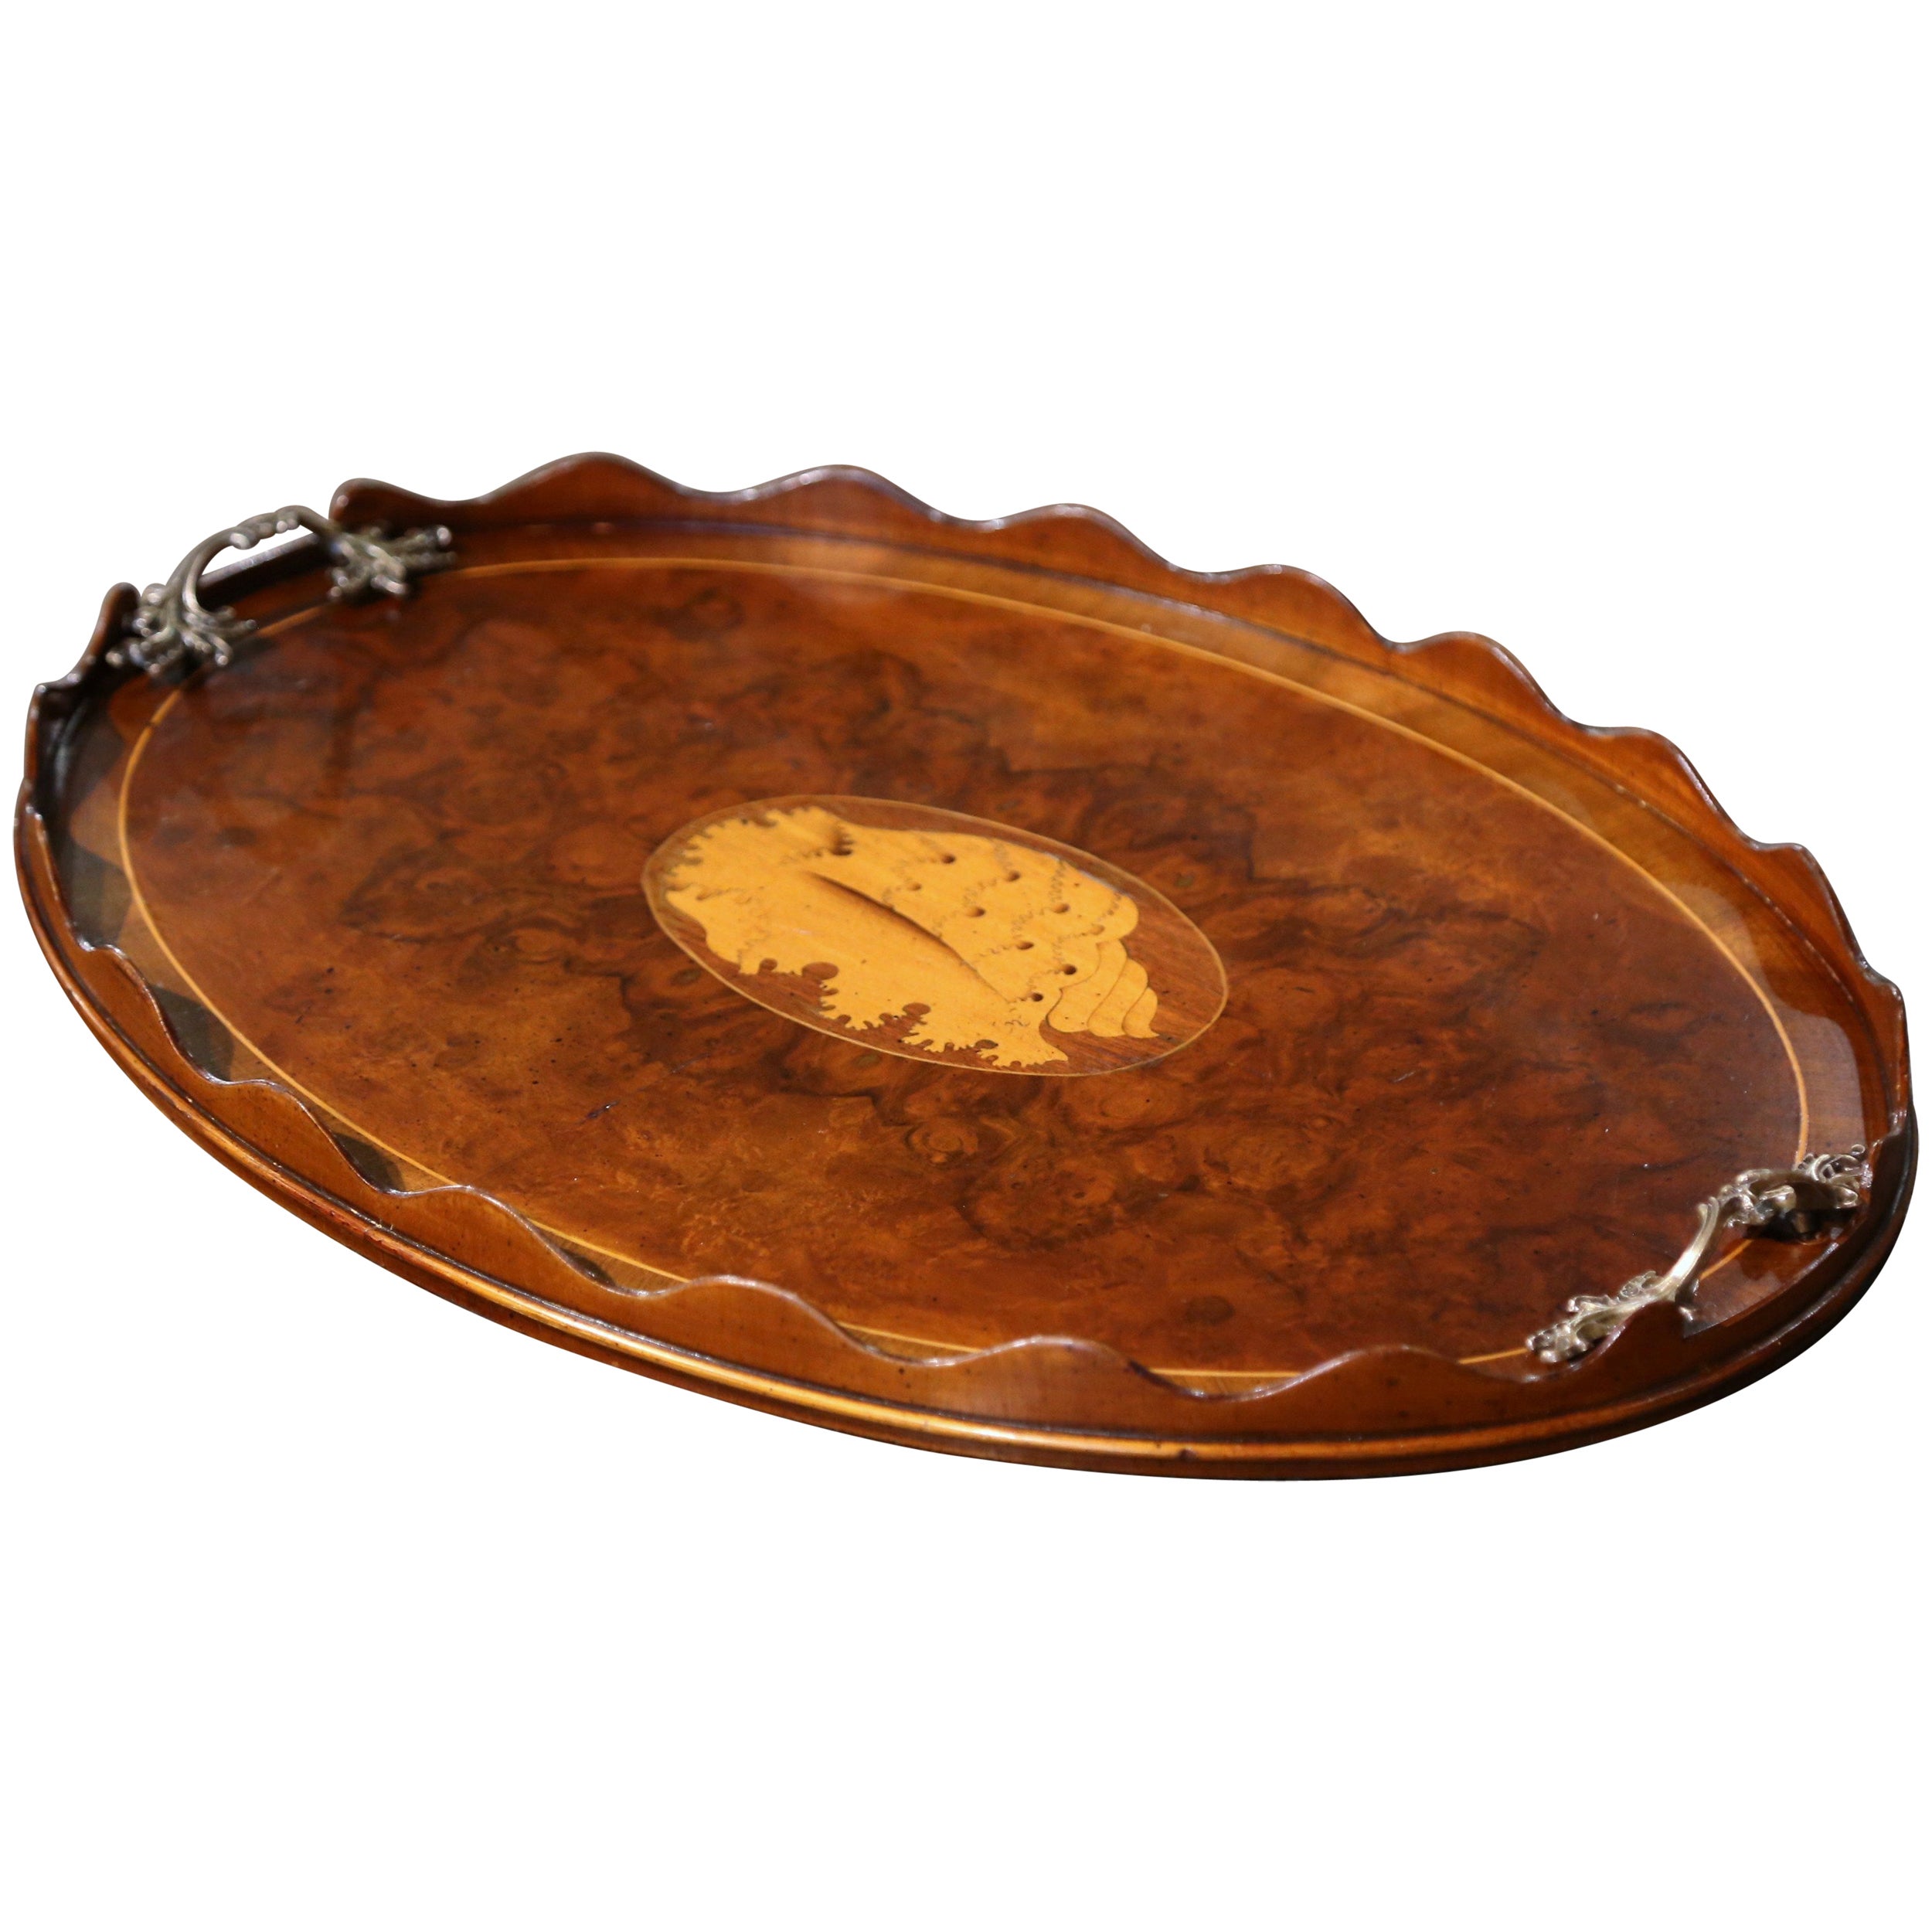 19th Century English Burl Walnut and Bronze Tray Table with Inlaid Shell Decor